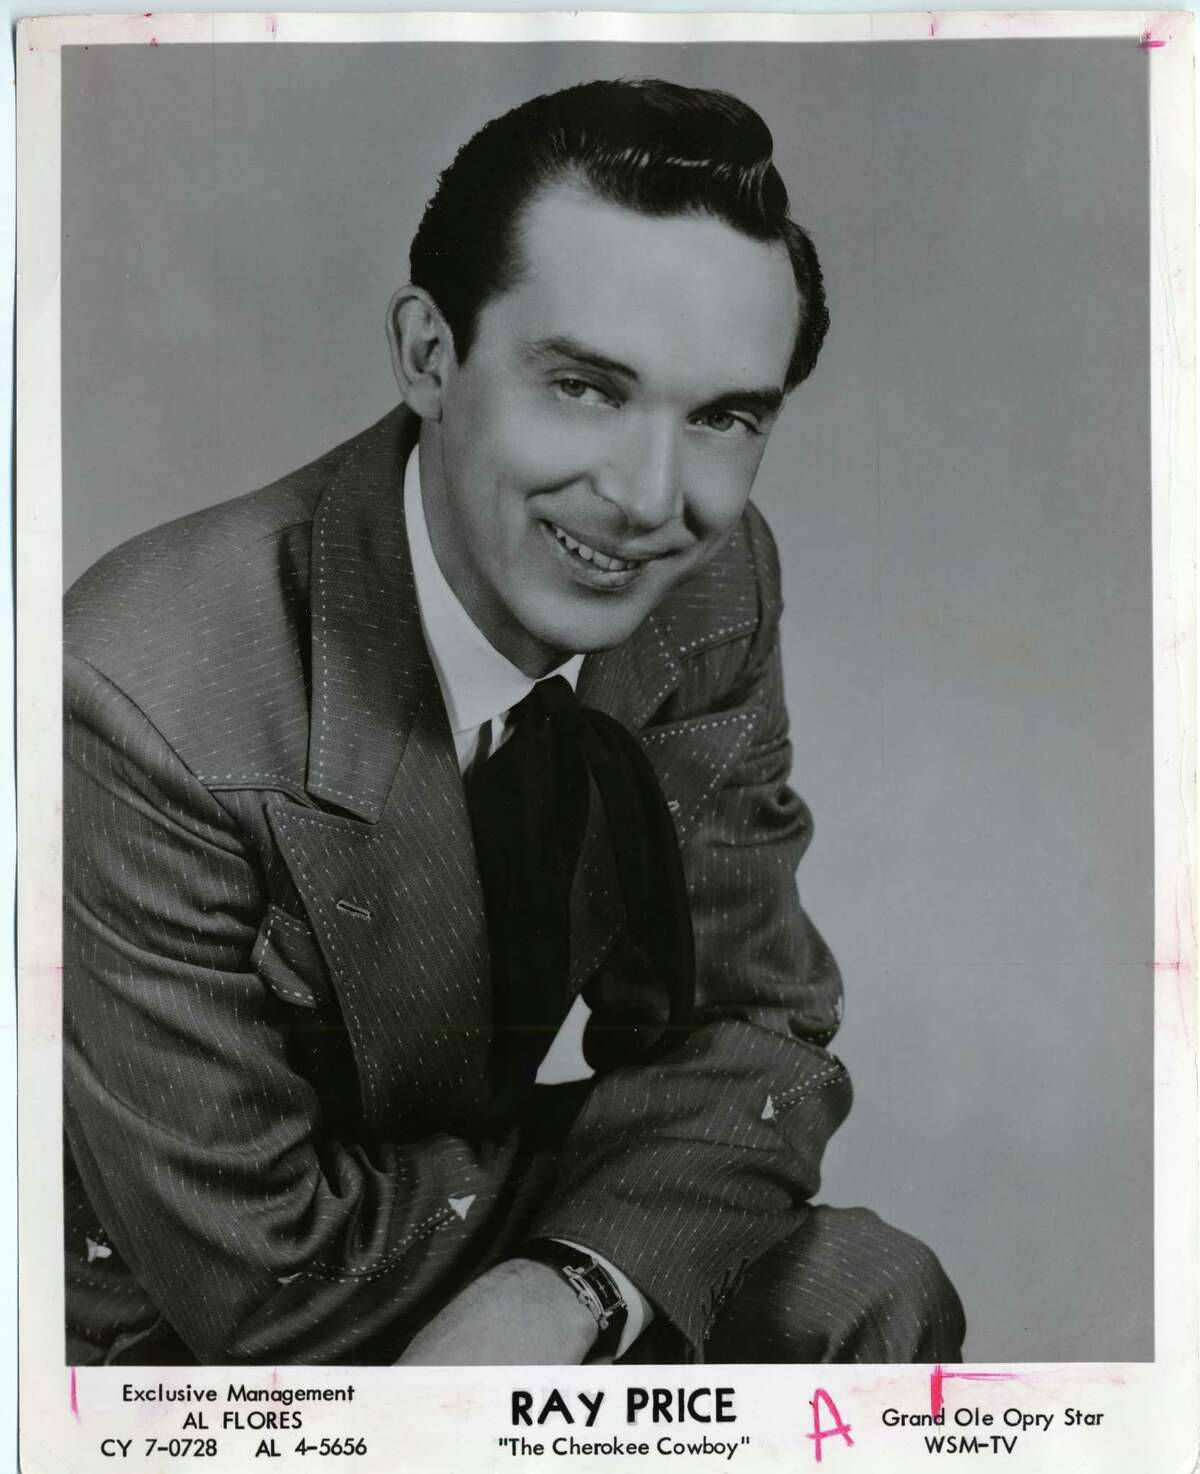 Autographed Portrait of Ray Price, Legendary Country Music Singer Wallpaper